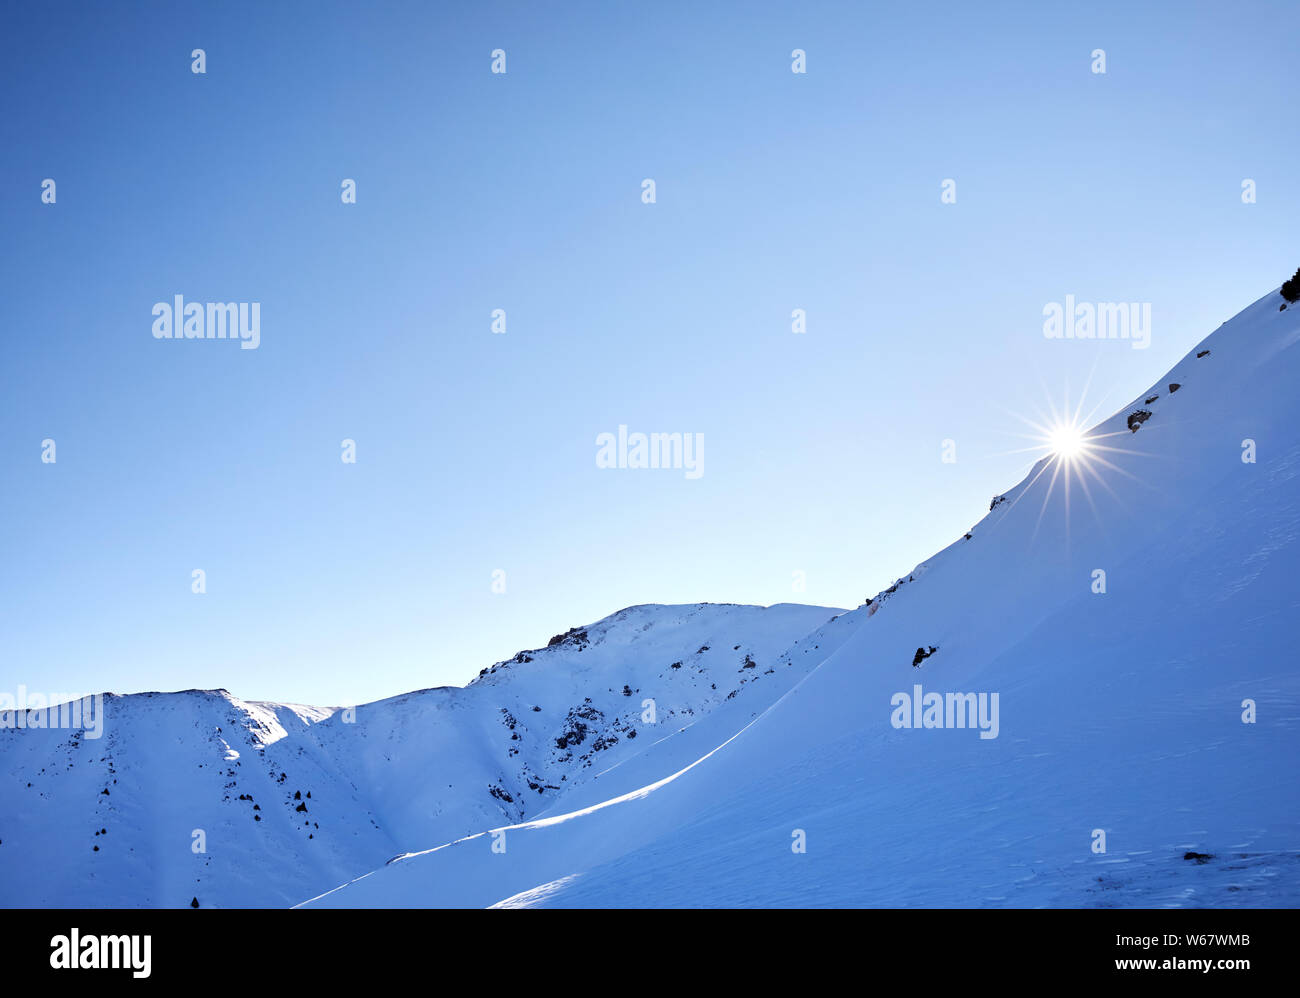 Sun in shape of star is rising at mountains with snow and glacier at winter time Stock Photo